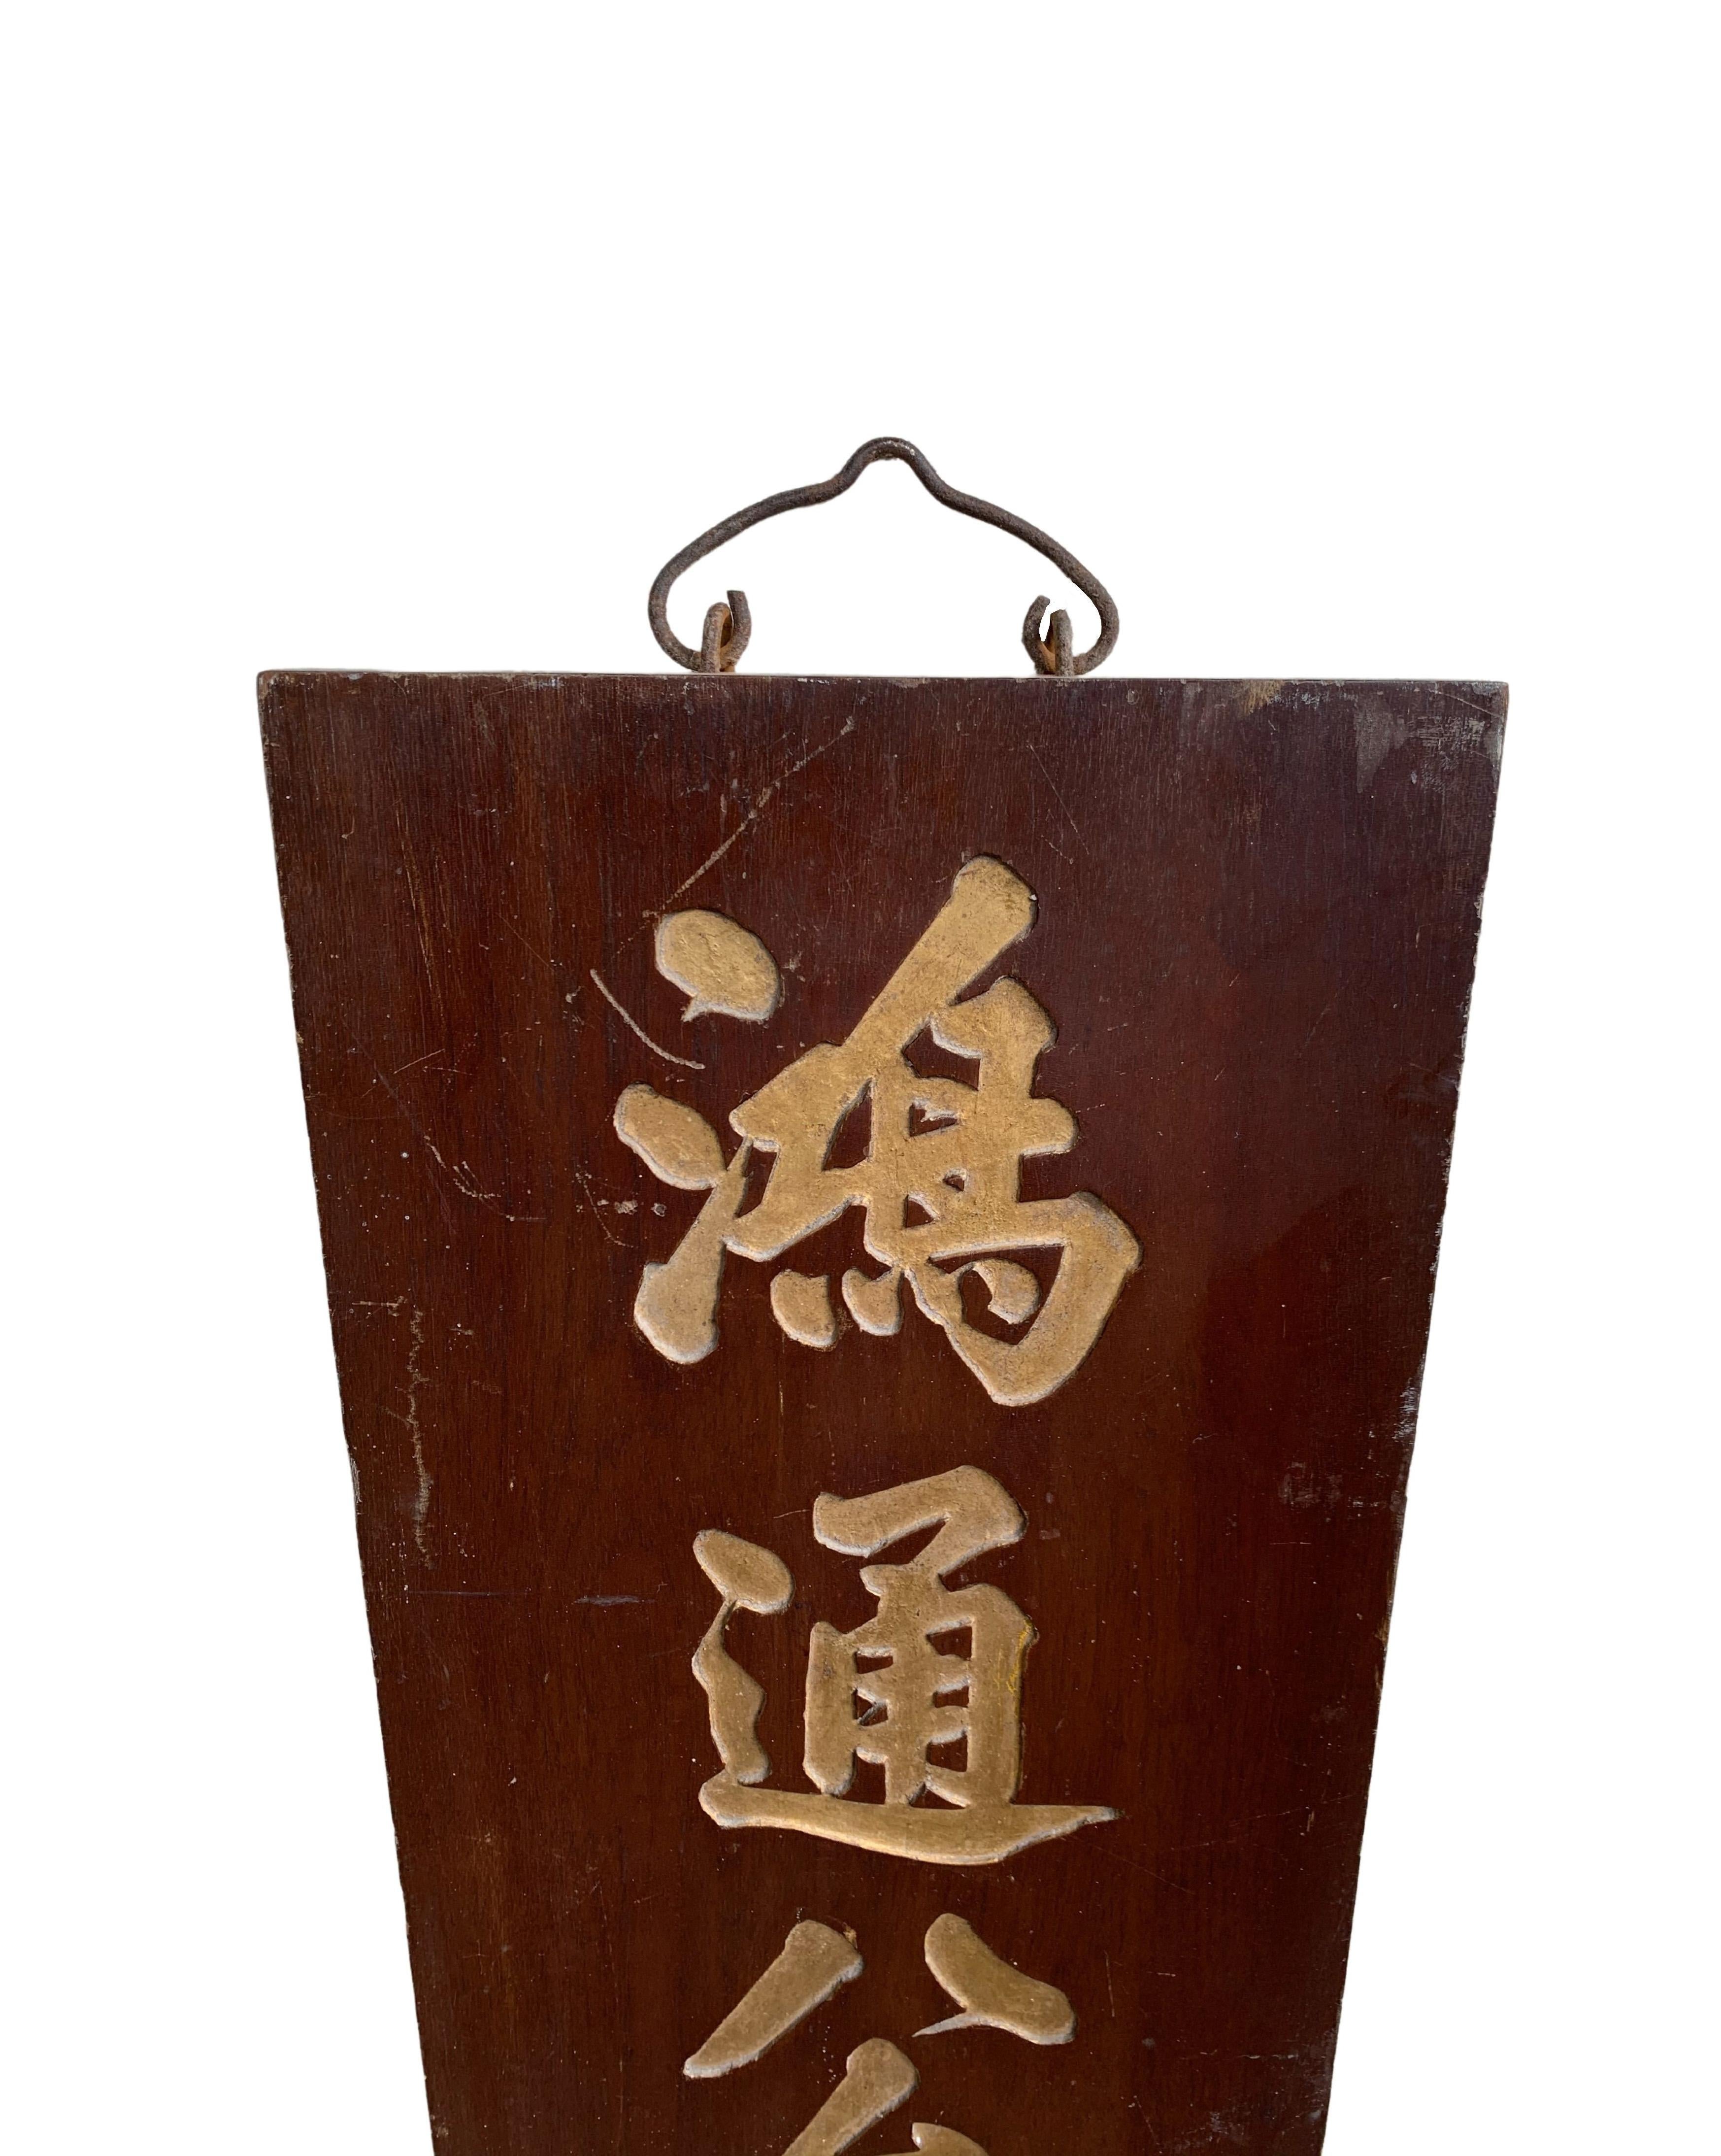 With a wood coloured base this signboard (crafted entirely from wood) highlights 3 large gold coloured Chinese Characters. The signboard dates to the Mid-20th Century and has aged beautifully with ageing of the wood as well as fading of the original